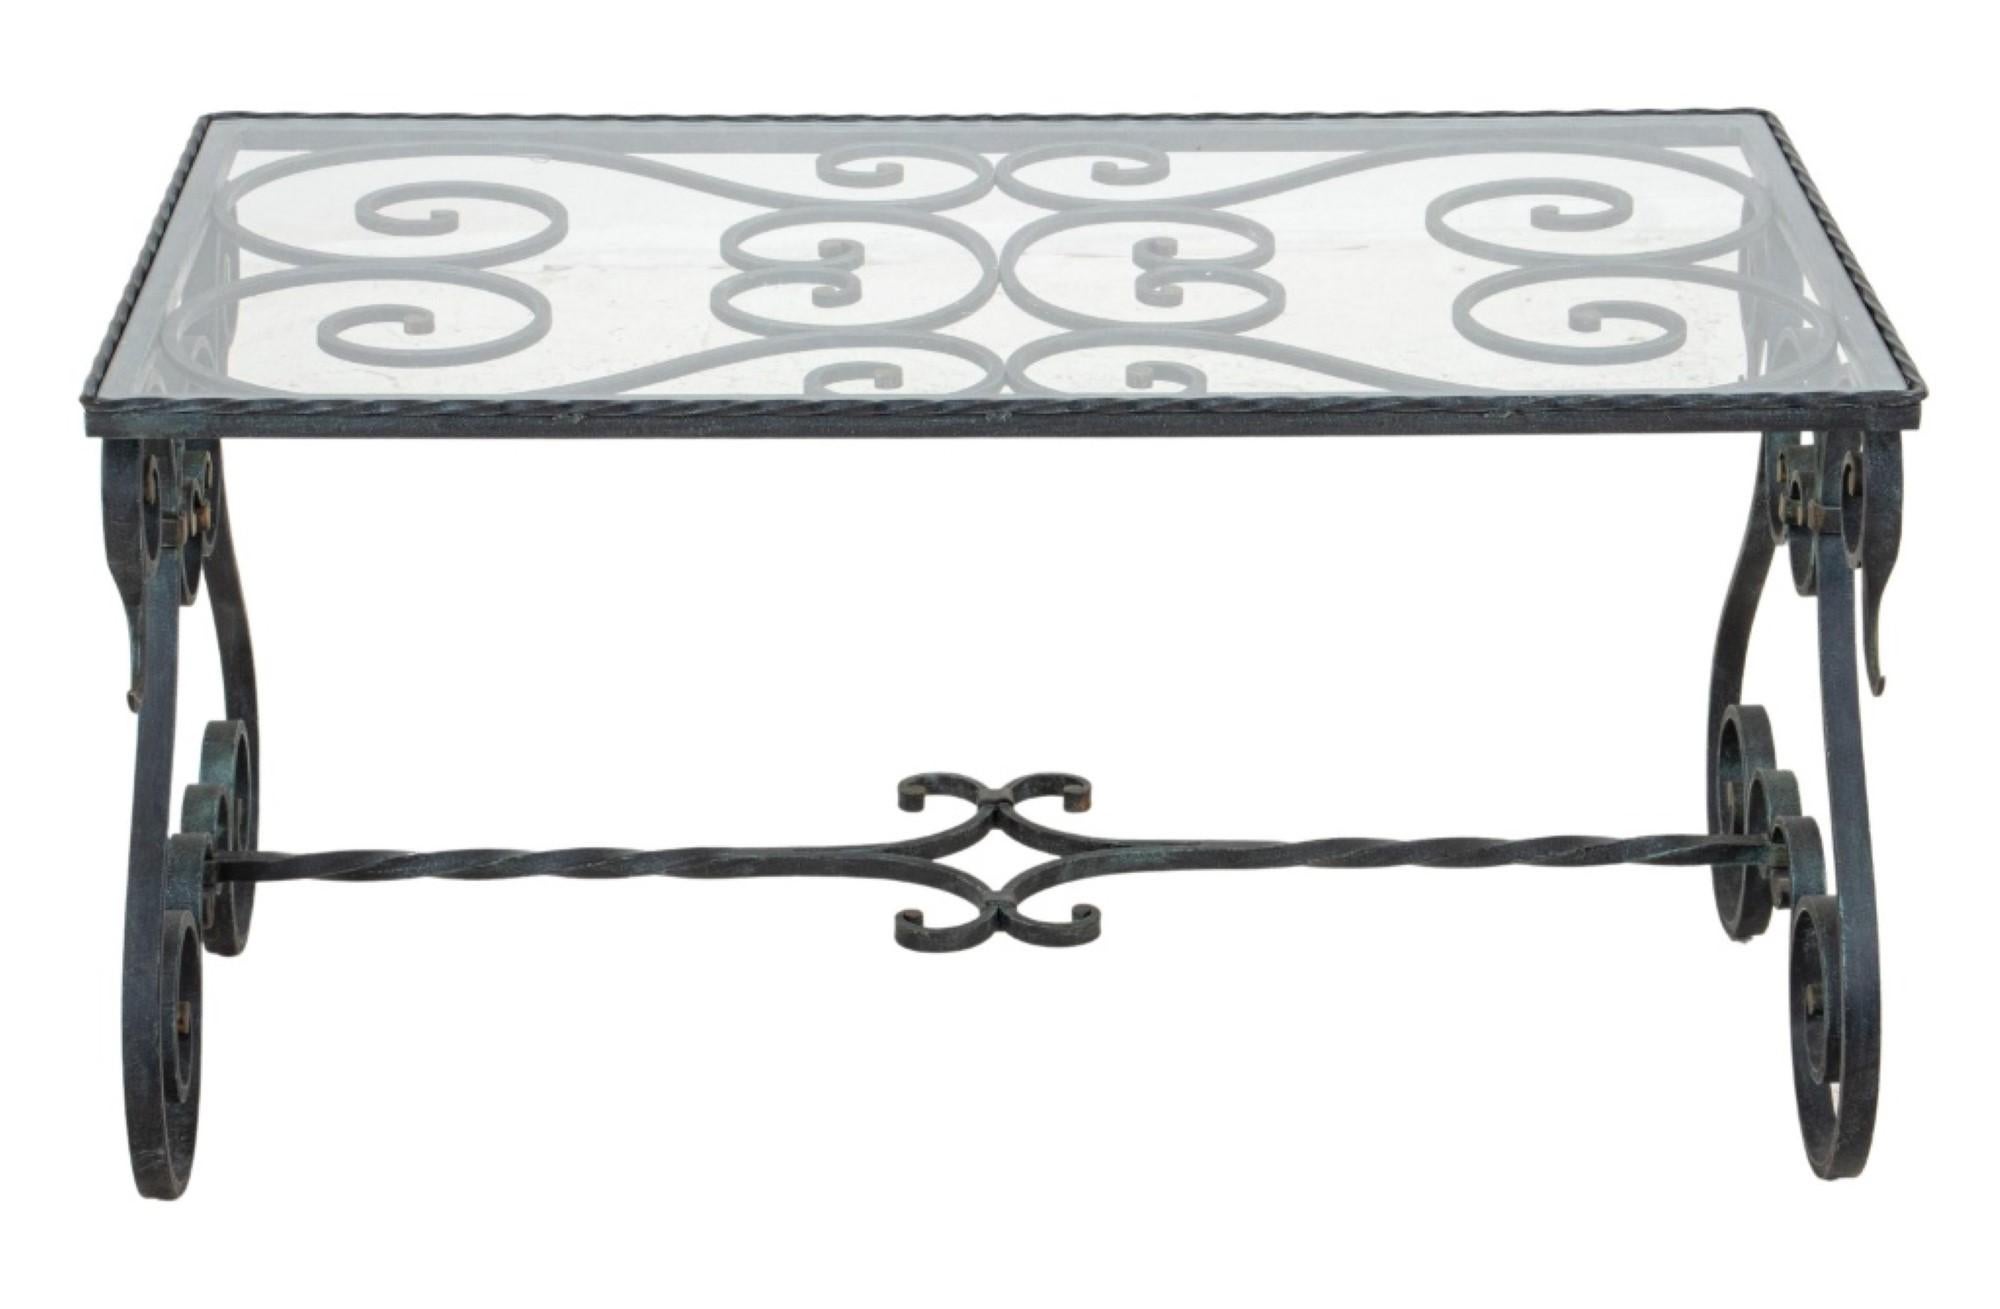 Wrought iron low table or coffee table with scrolled stretcher-joined legs and a glass top.

18 inches in height, 36 inches in width, and 20.5 inches in depth.